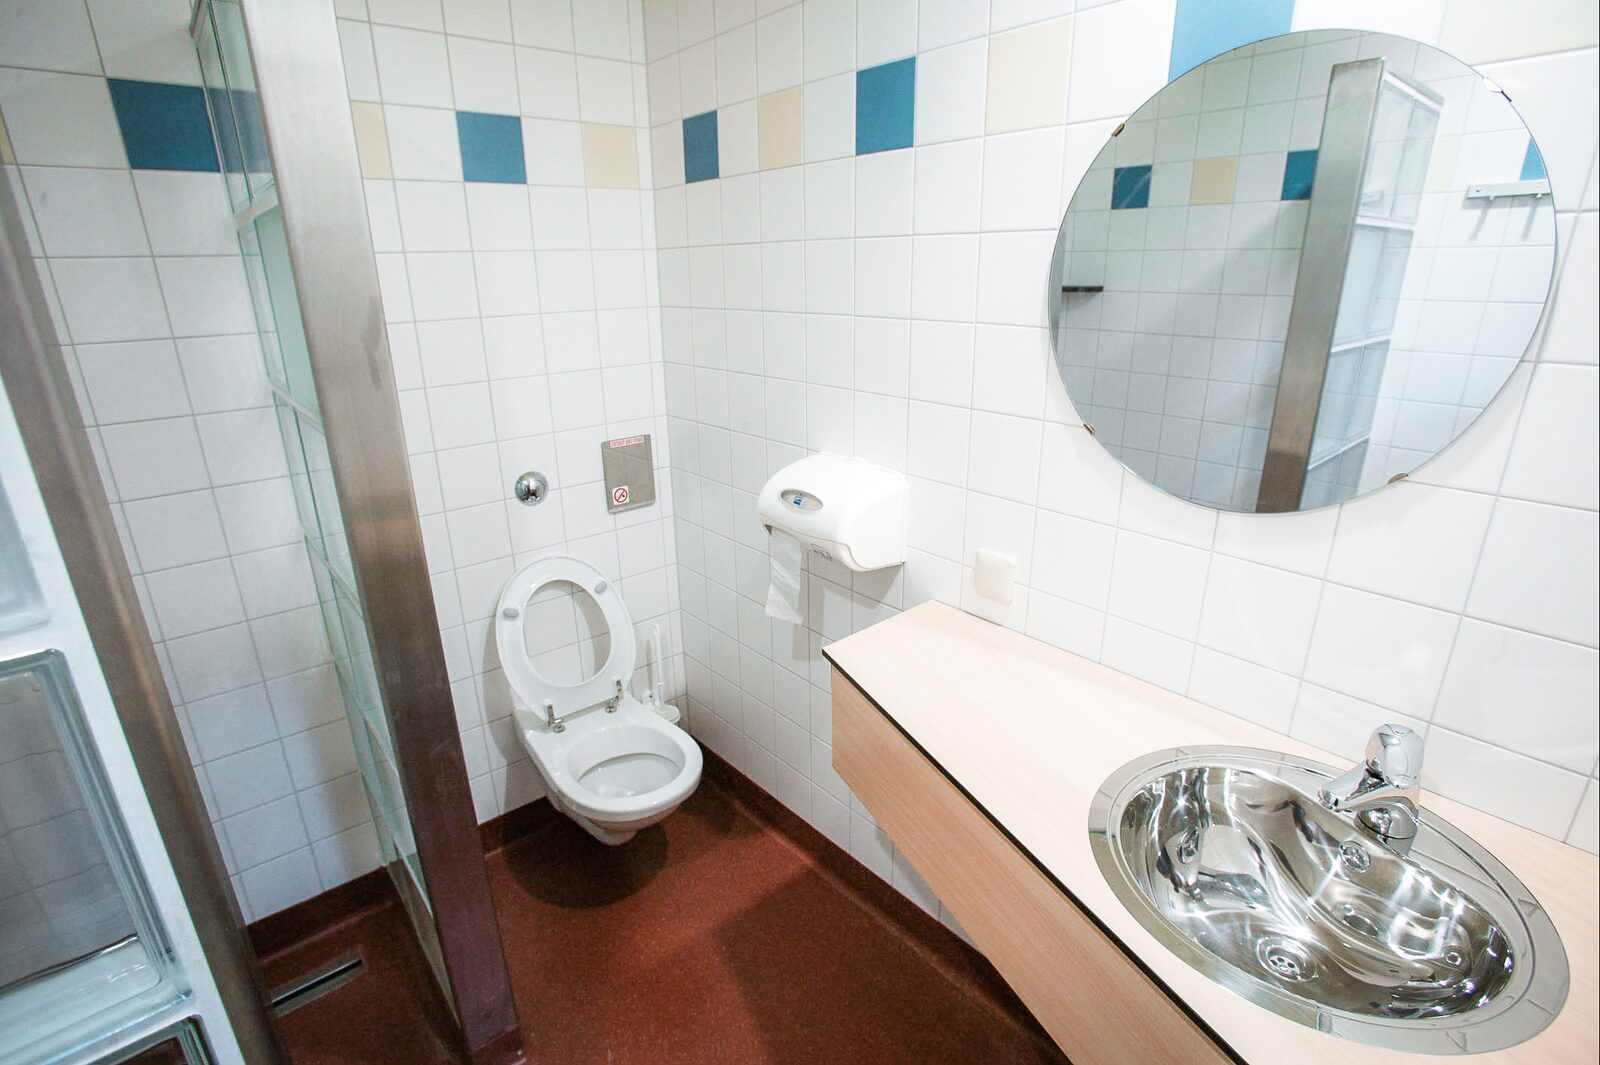 Accessible bathrooms and toilets